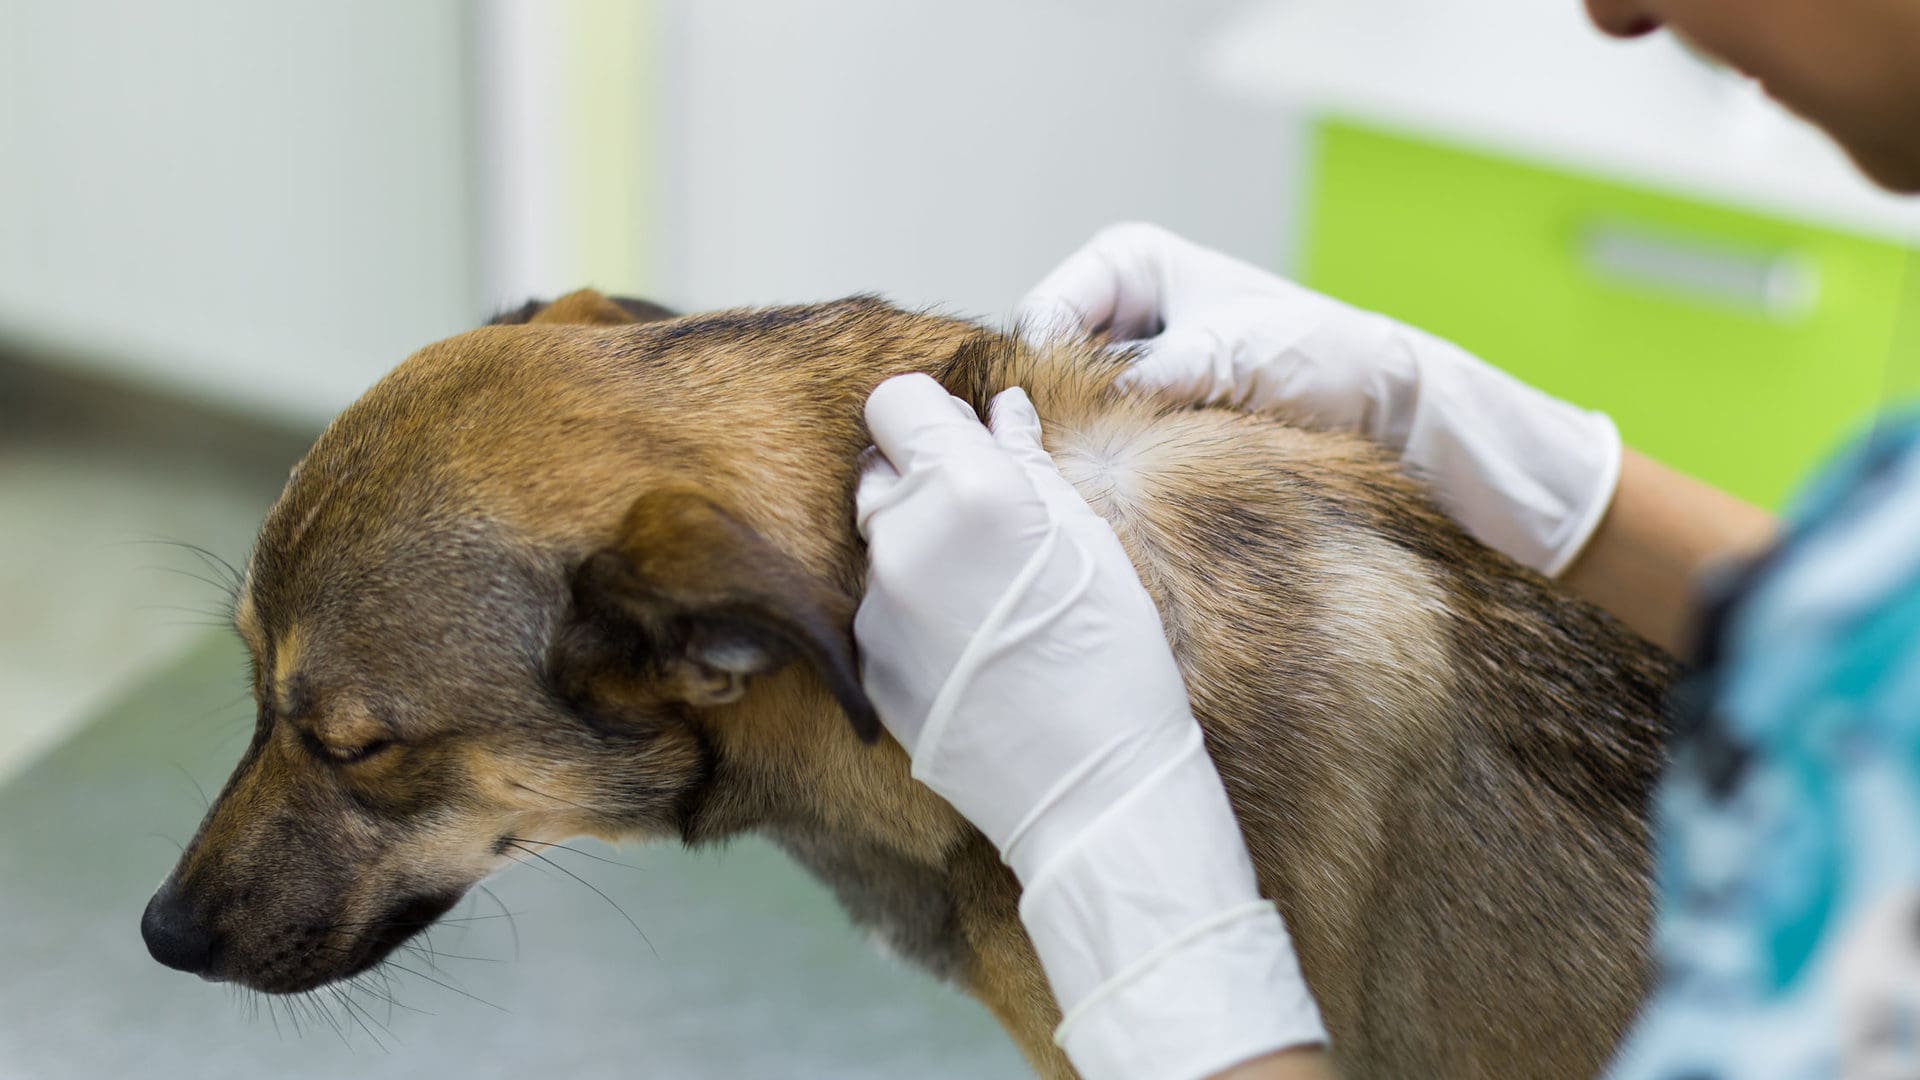 Physical exam of the dog at the veterinarian